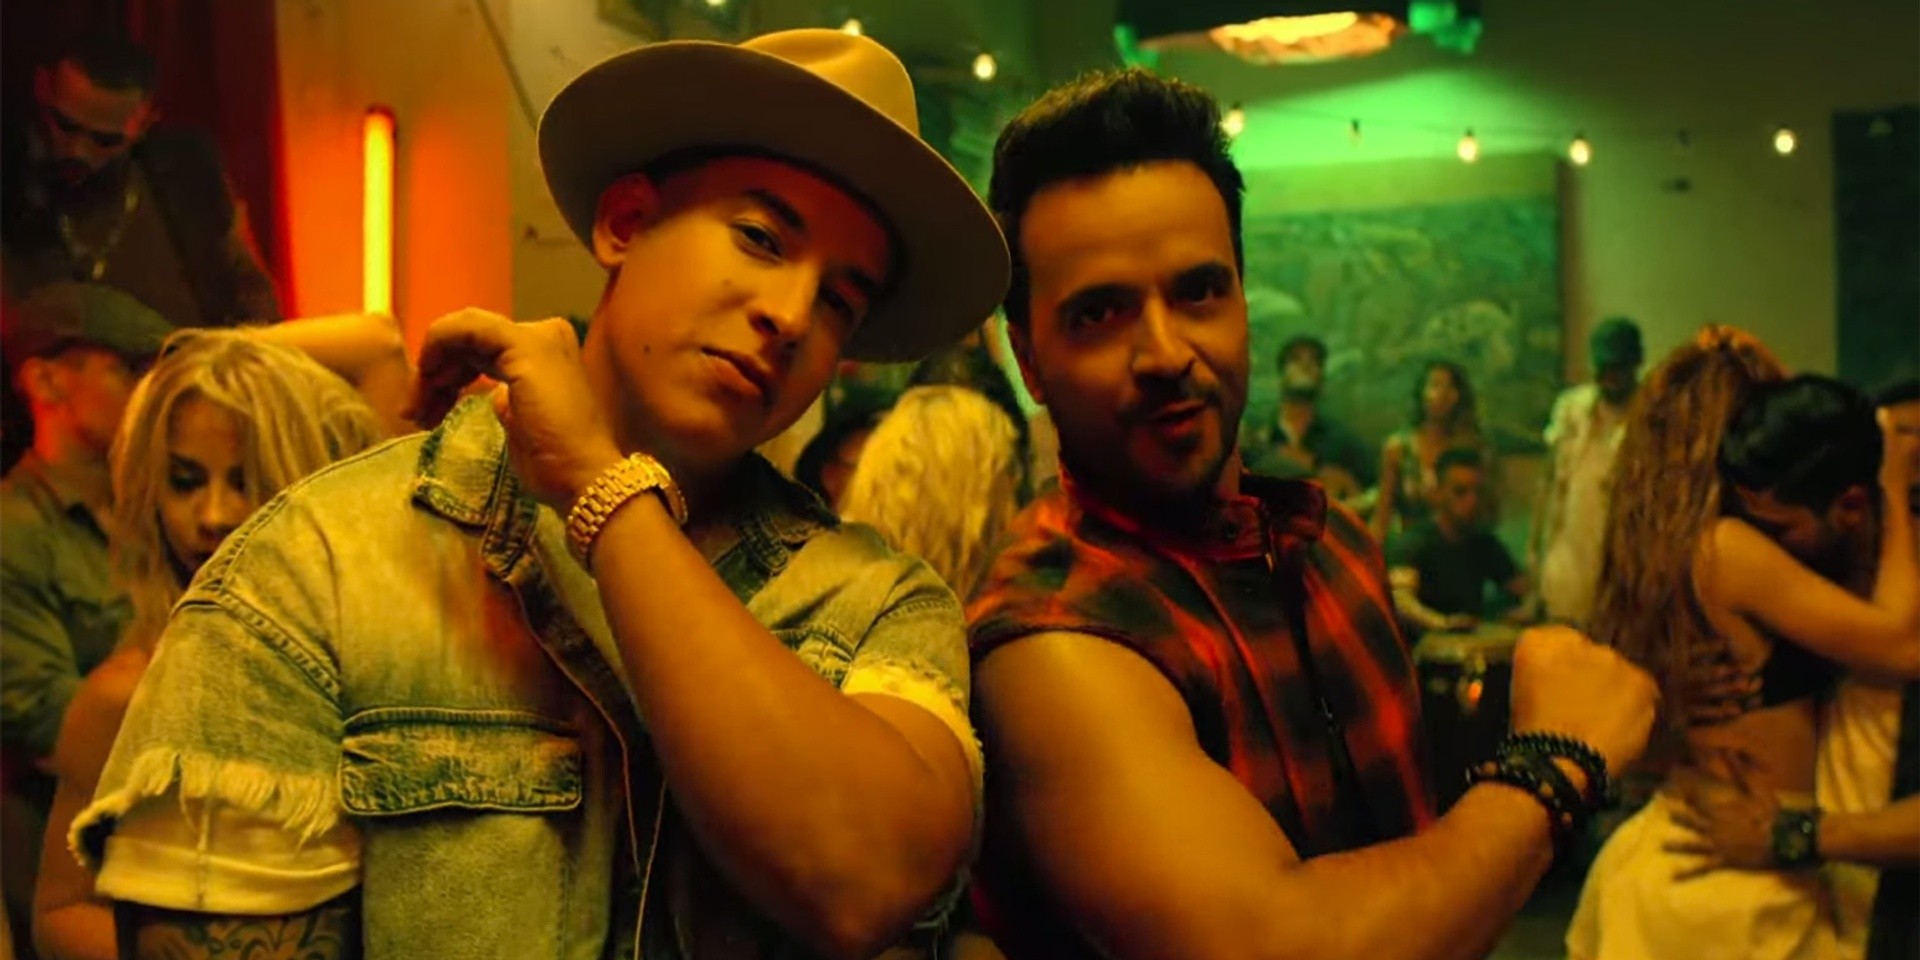 'Despacito' is banned in Malaysia, and the whole world looks on with envy